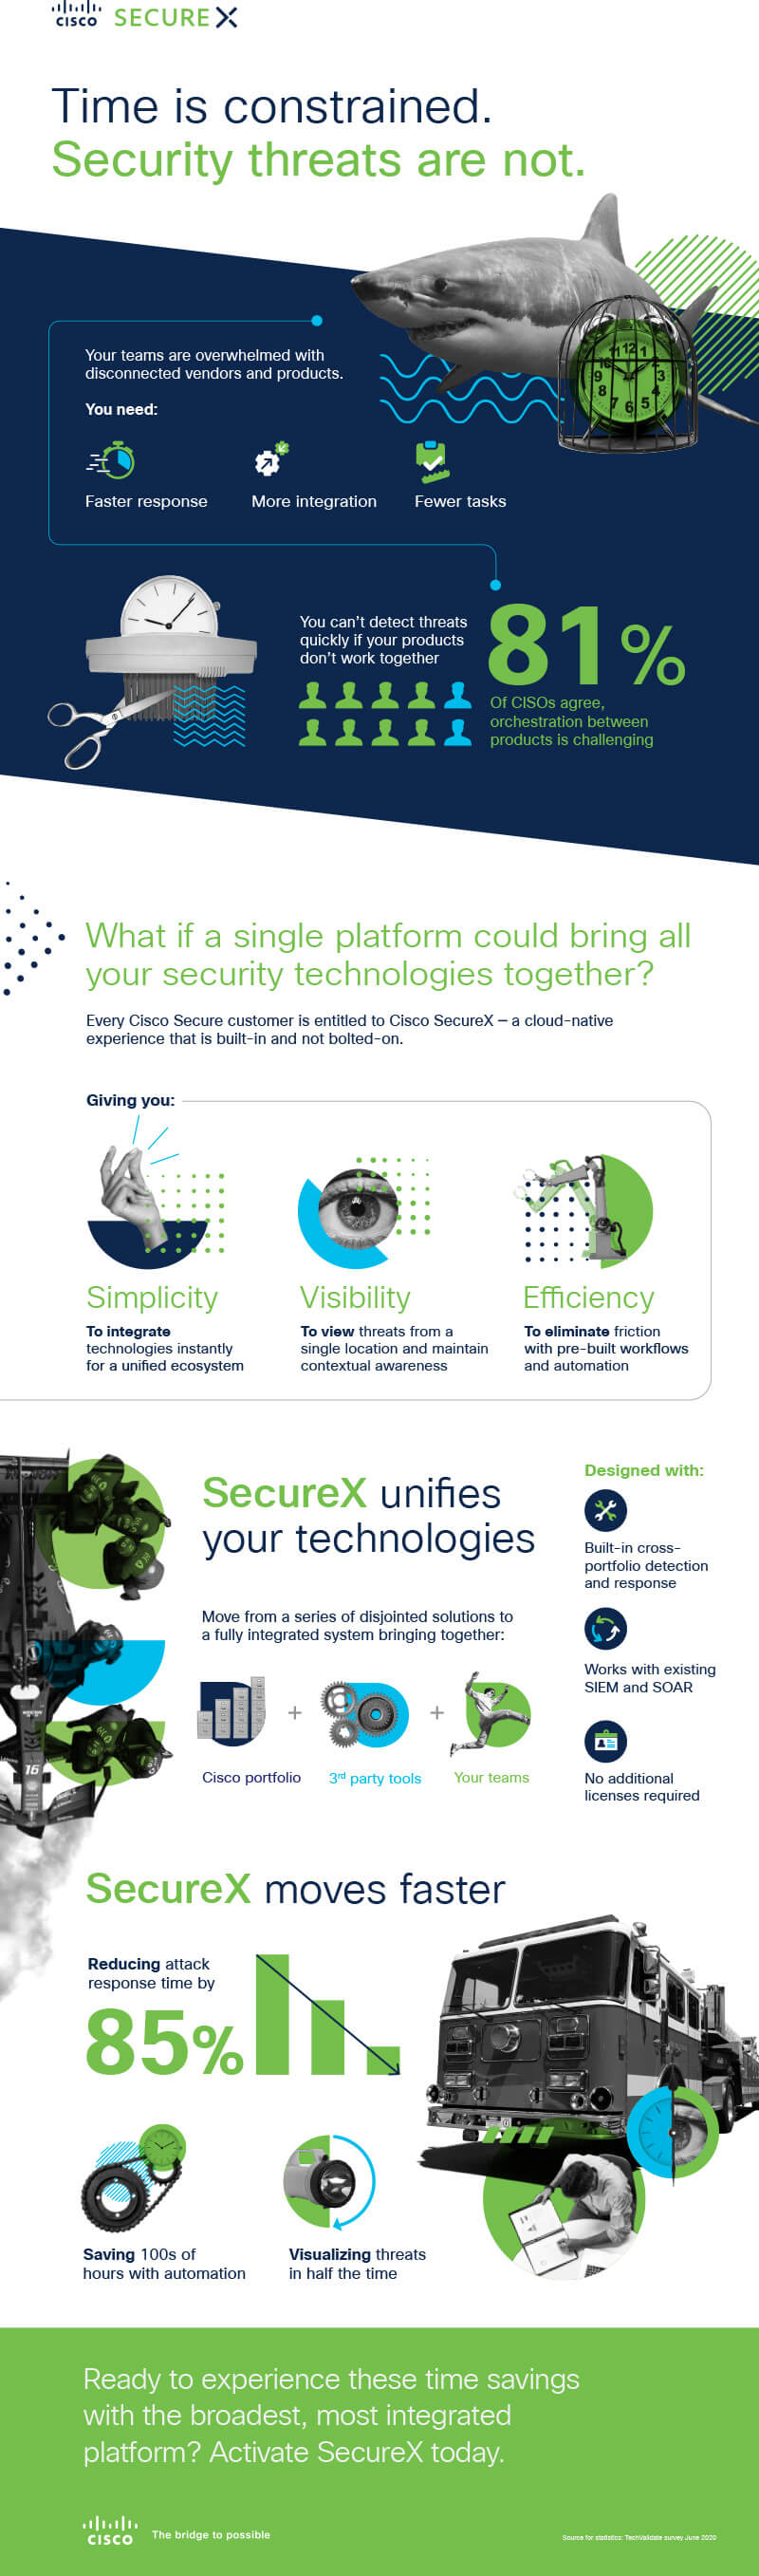 Unified Security Platform With Cisco SecureX  as translated below